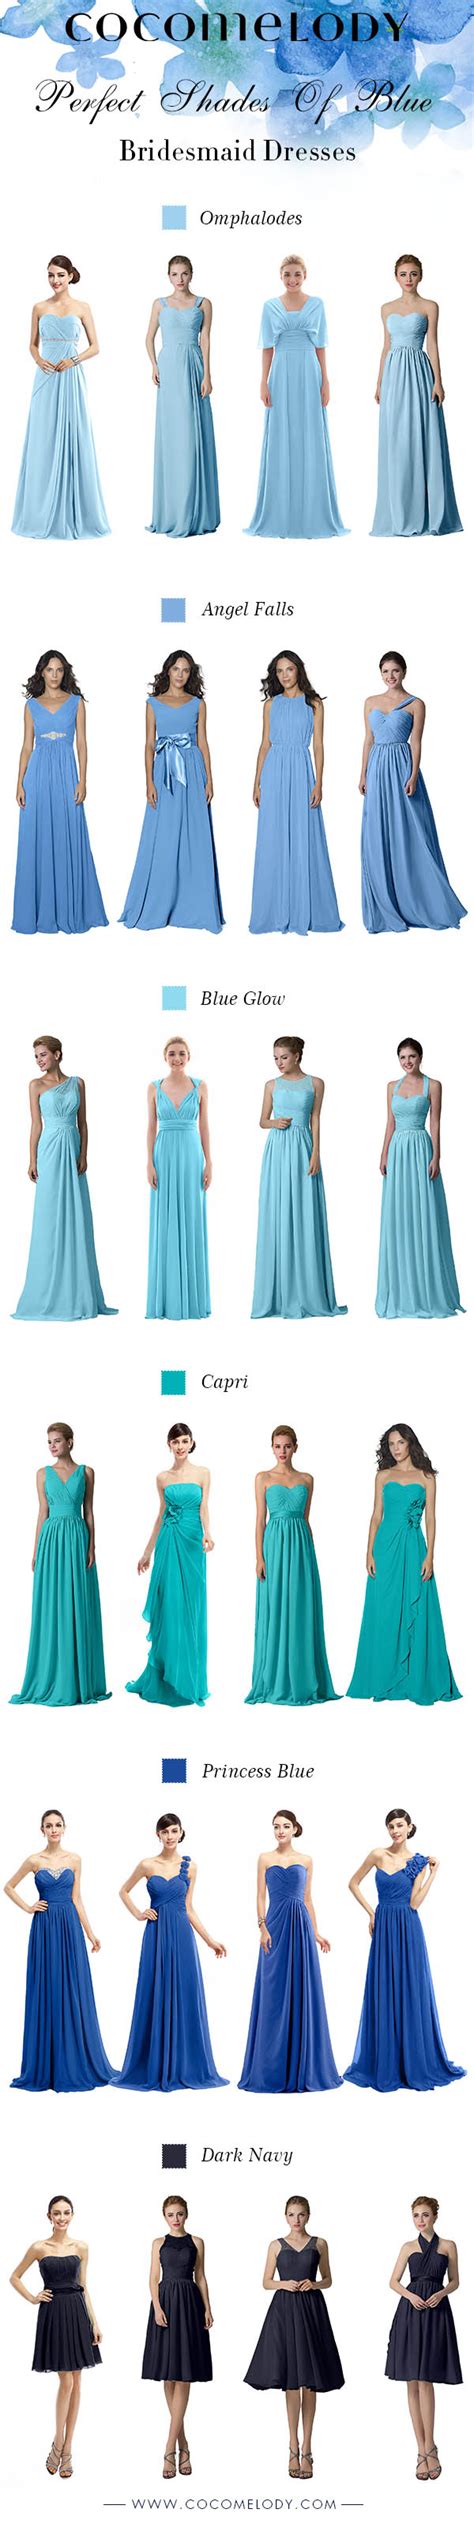 Perfect Shades Of Blue Bridesmaid Dresses All Sizes And More Styles To